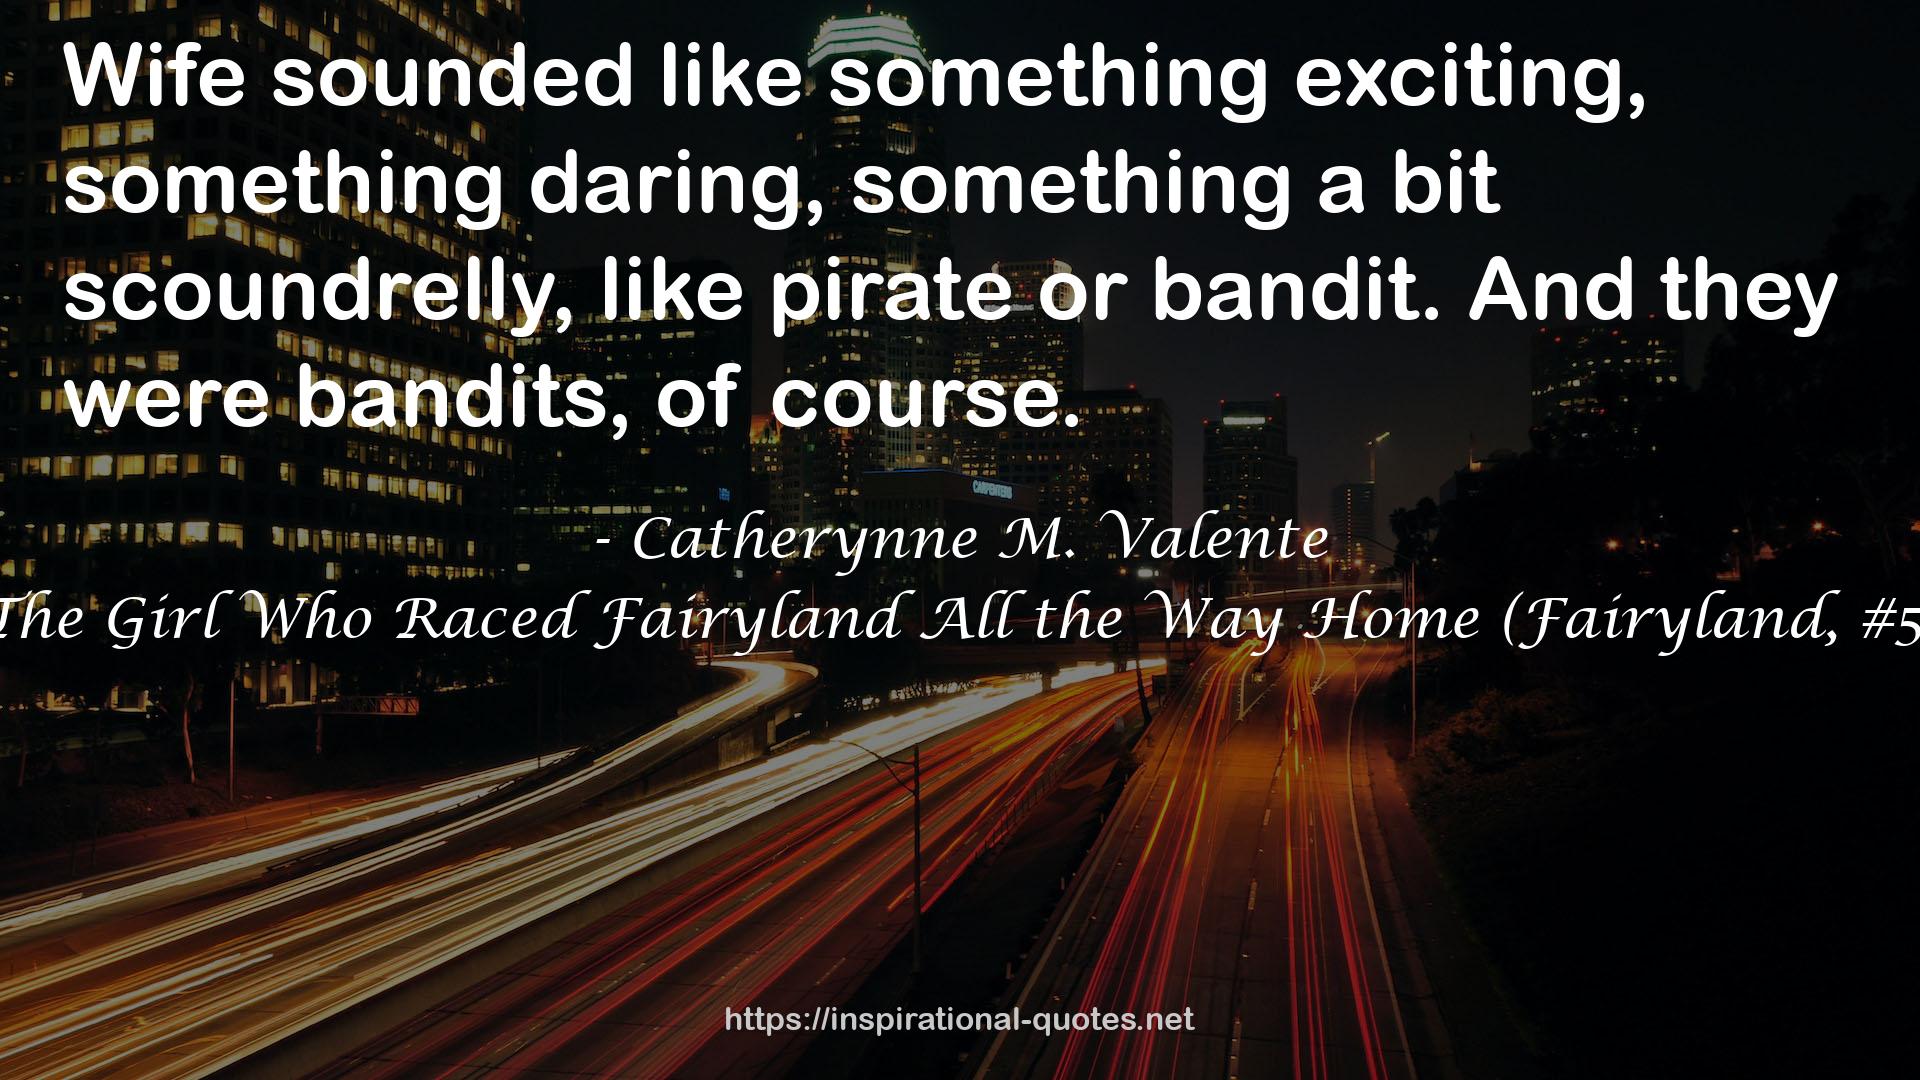 The Girl Who Raced Fairyland All the Way Home (Fairyland, #5) QUOTES